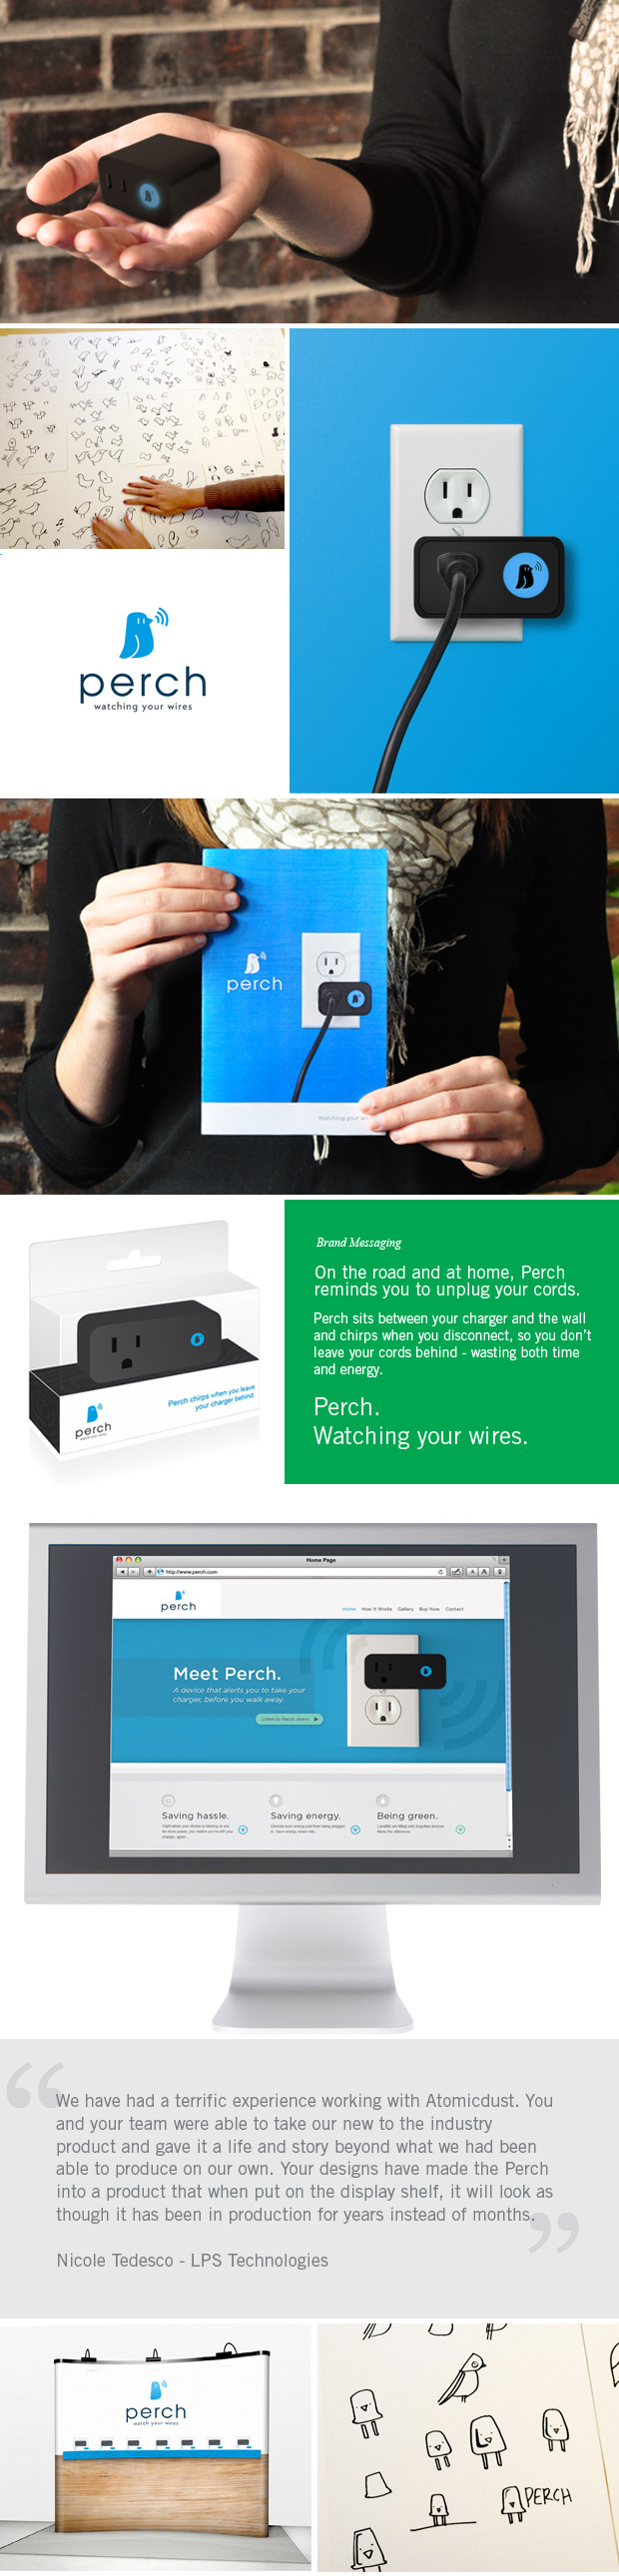 Branding and design layouts for Perch - Watching Your Wires